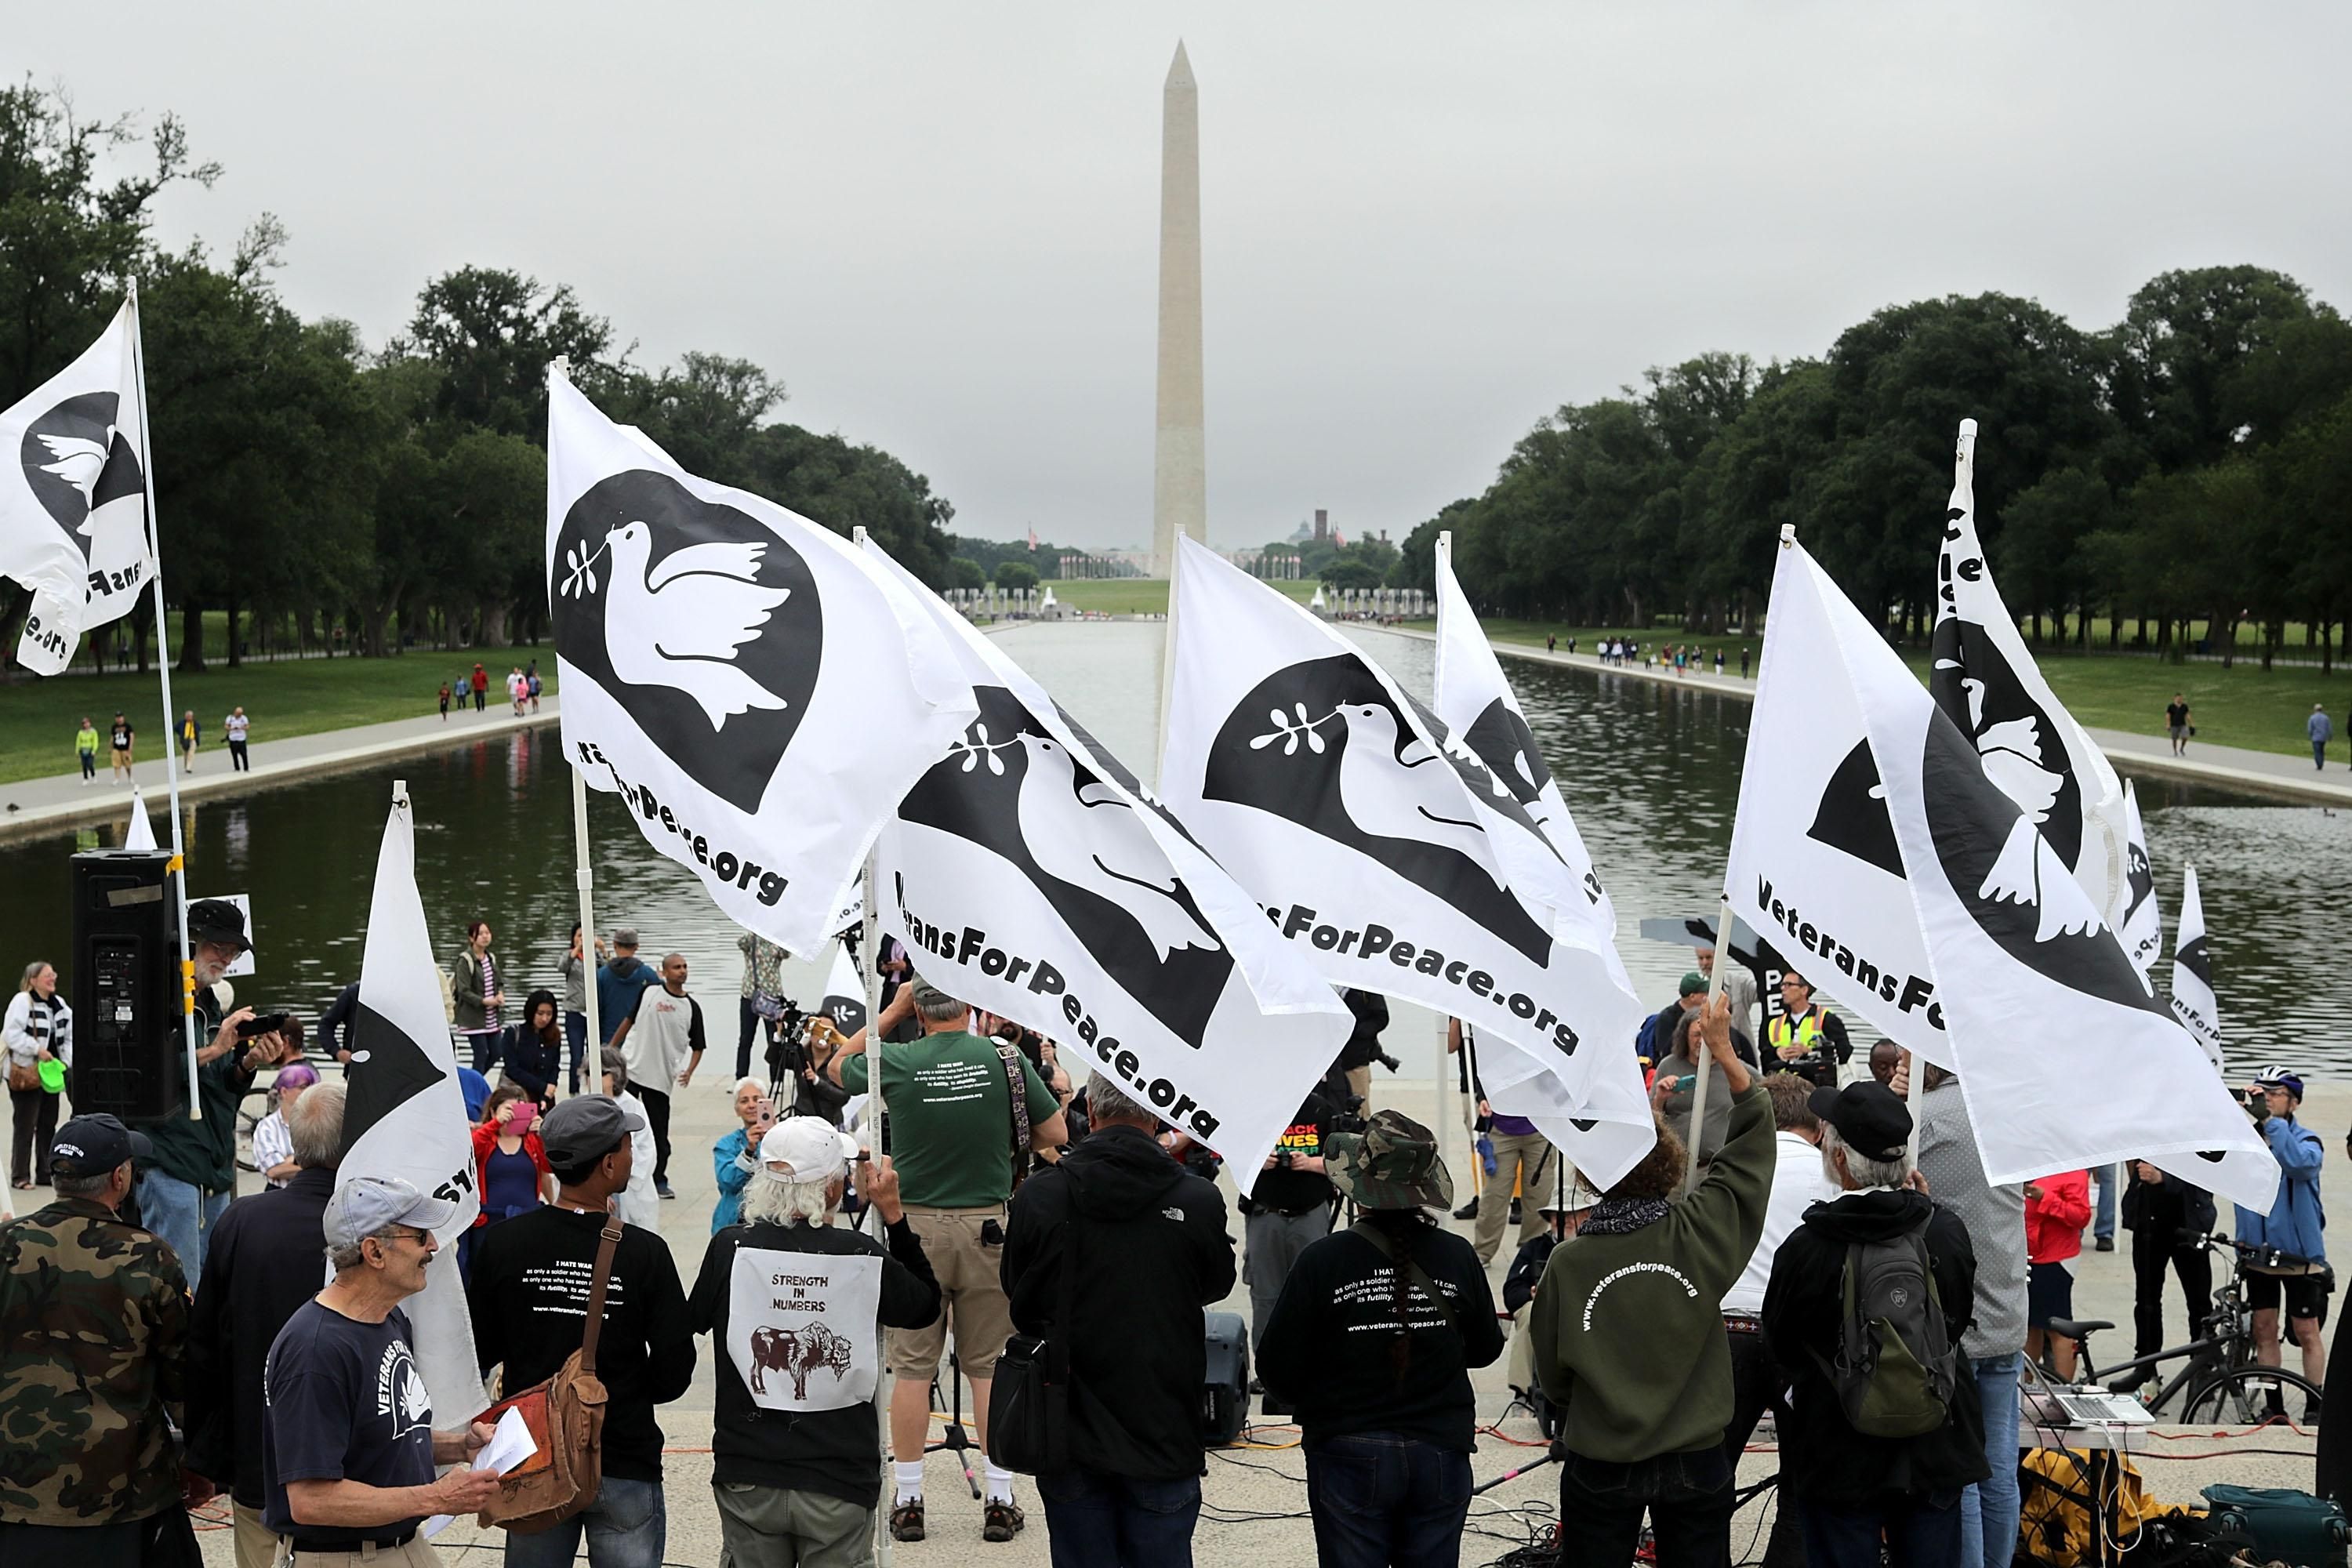 Members of Veterans for Peace rally in front of the Lincoln Memorial May 30, 2017 in Washington, D.C